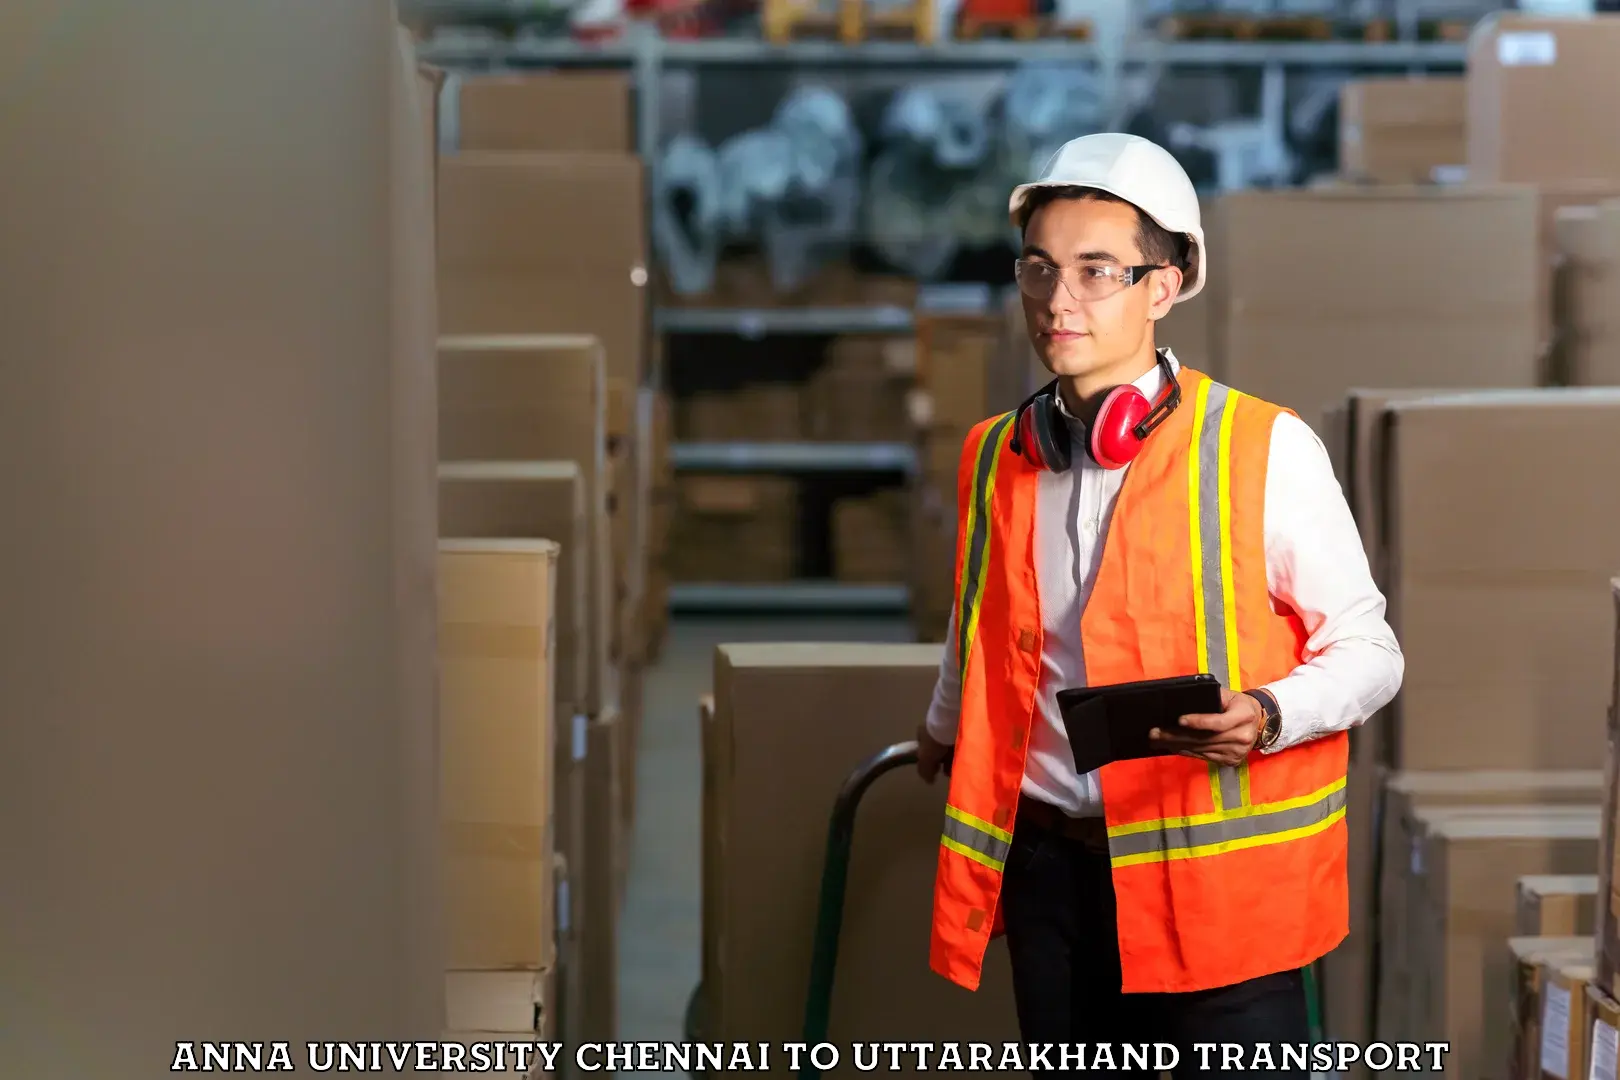 Delivery service Anna University Chennai to IIT Roorkee